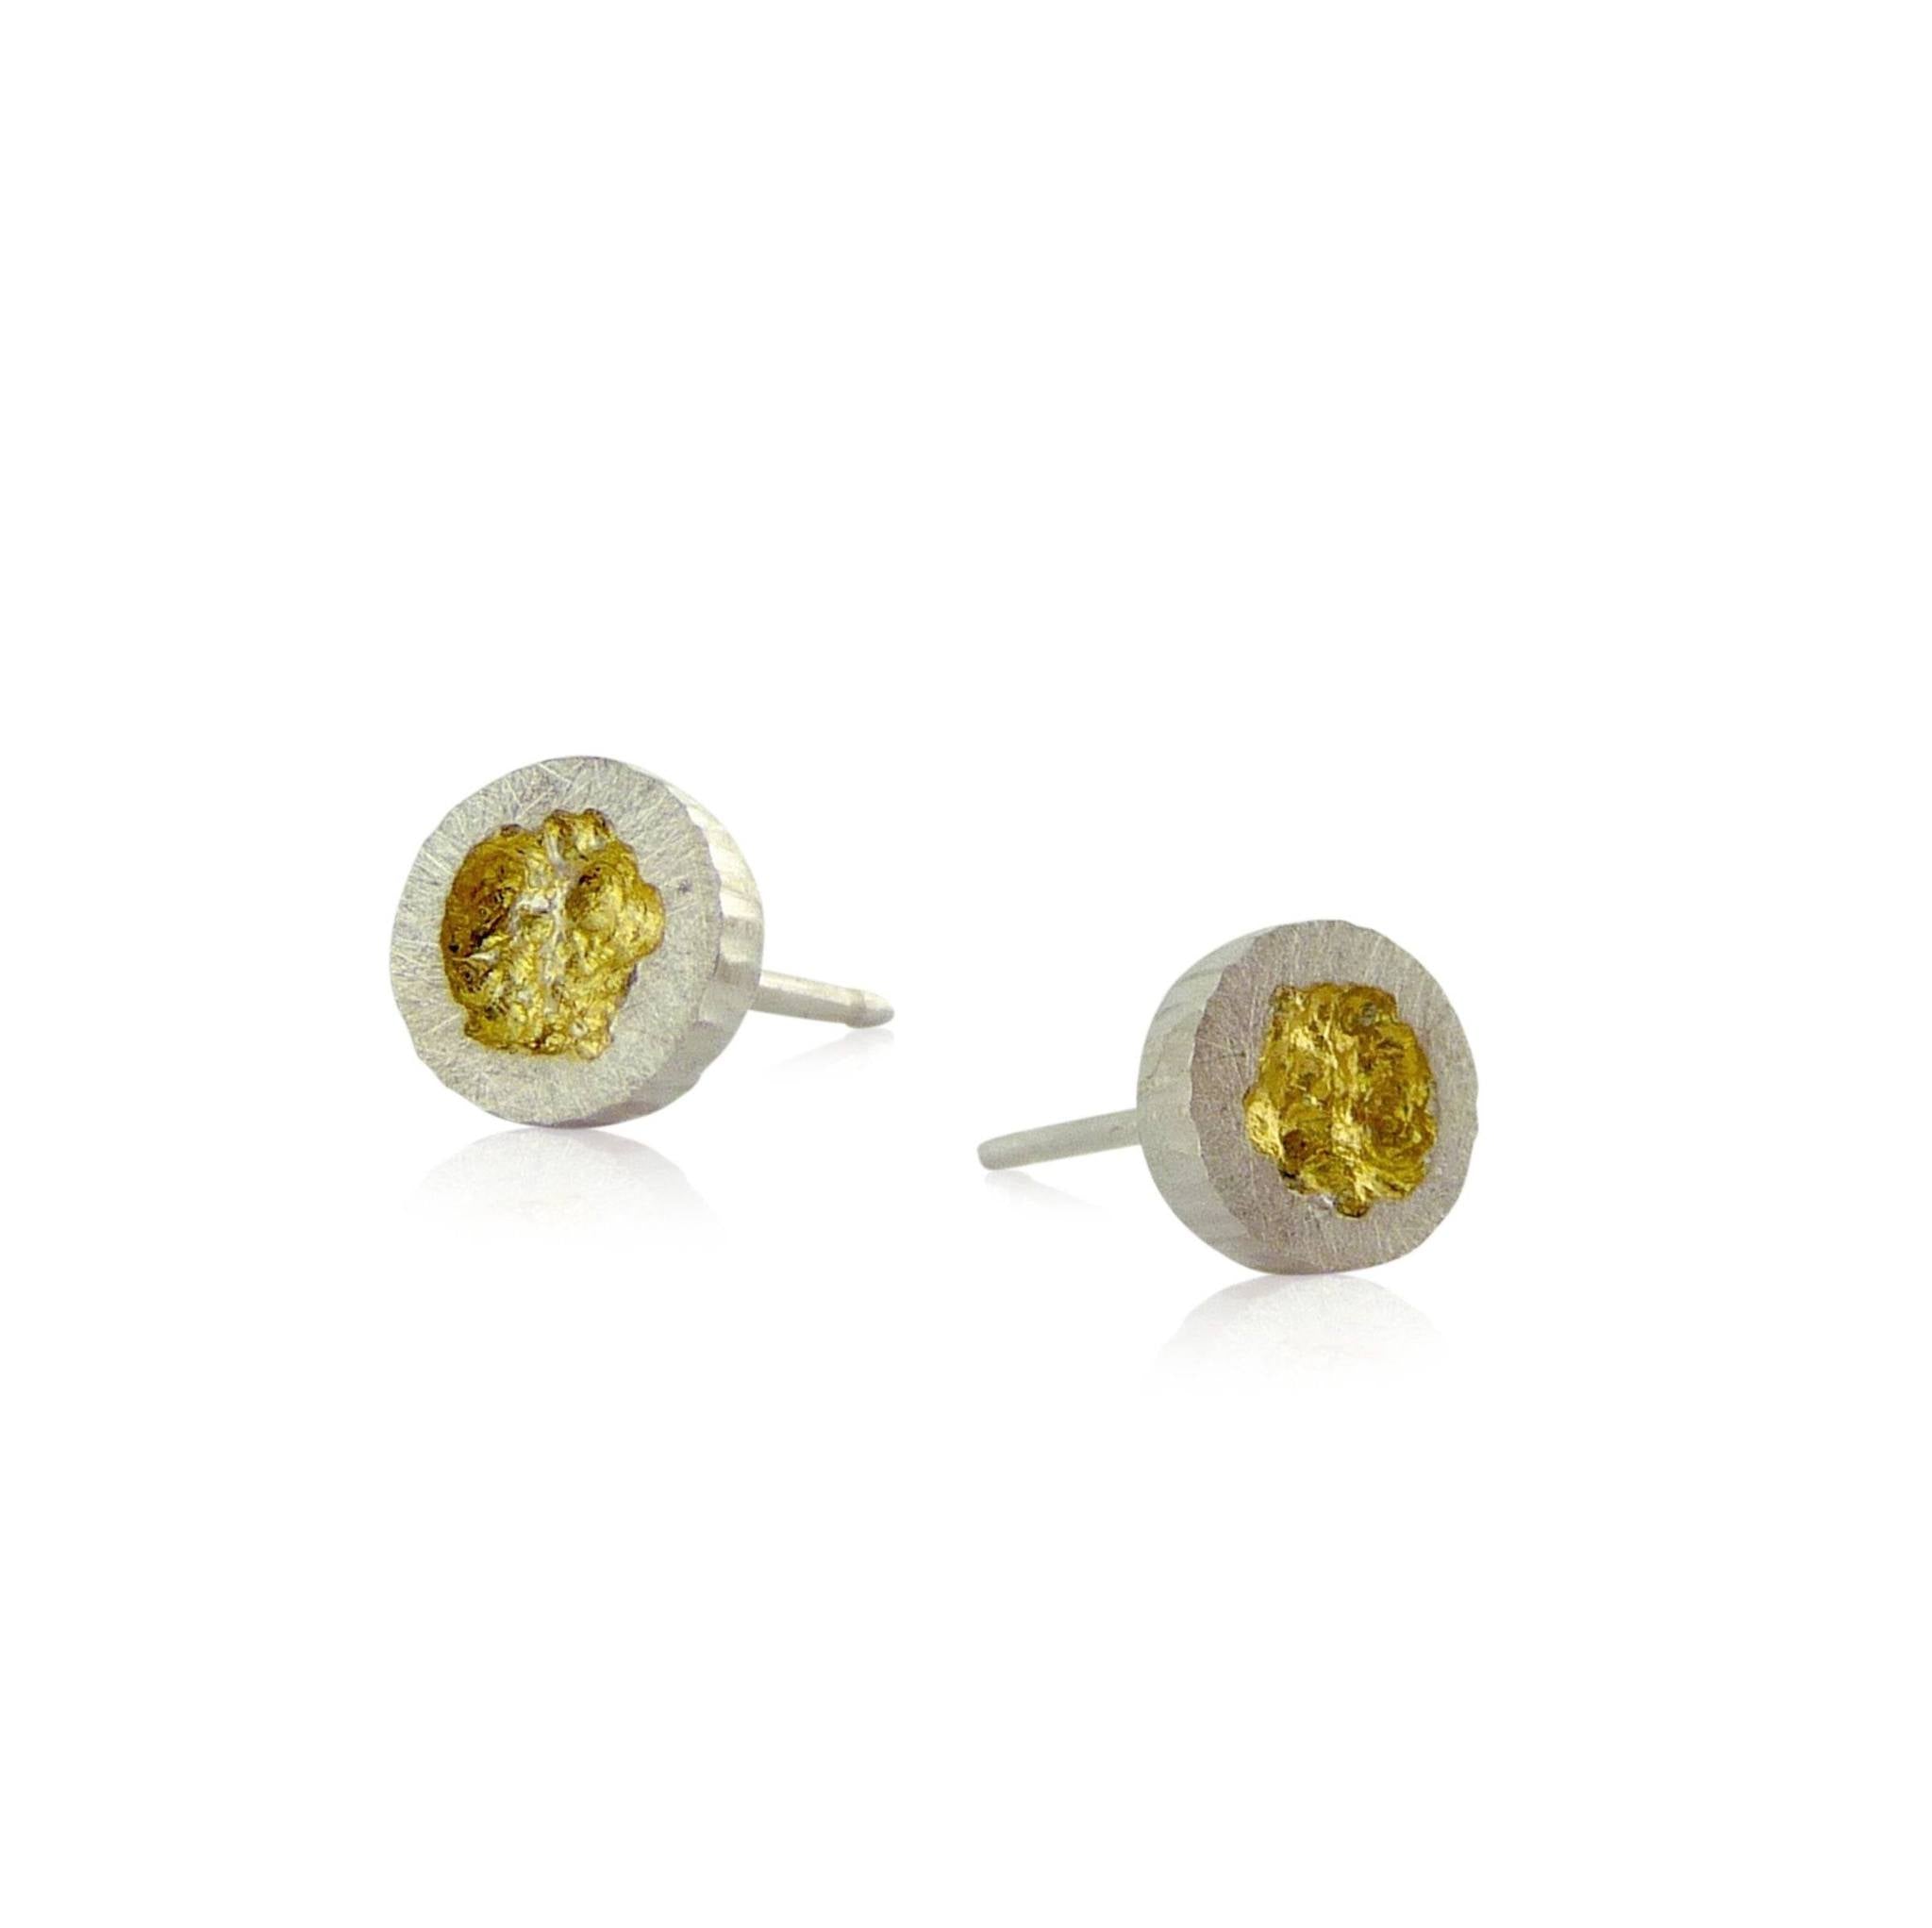 Tiny Erosion Gold Stud Earrings in Bright Finish